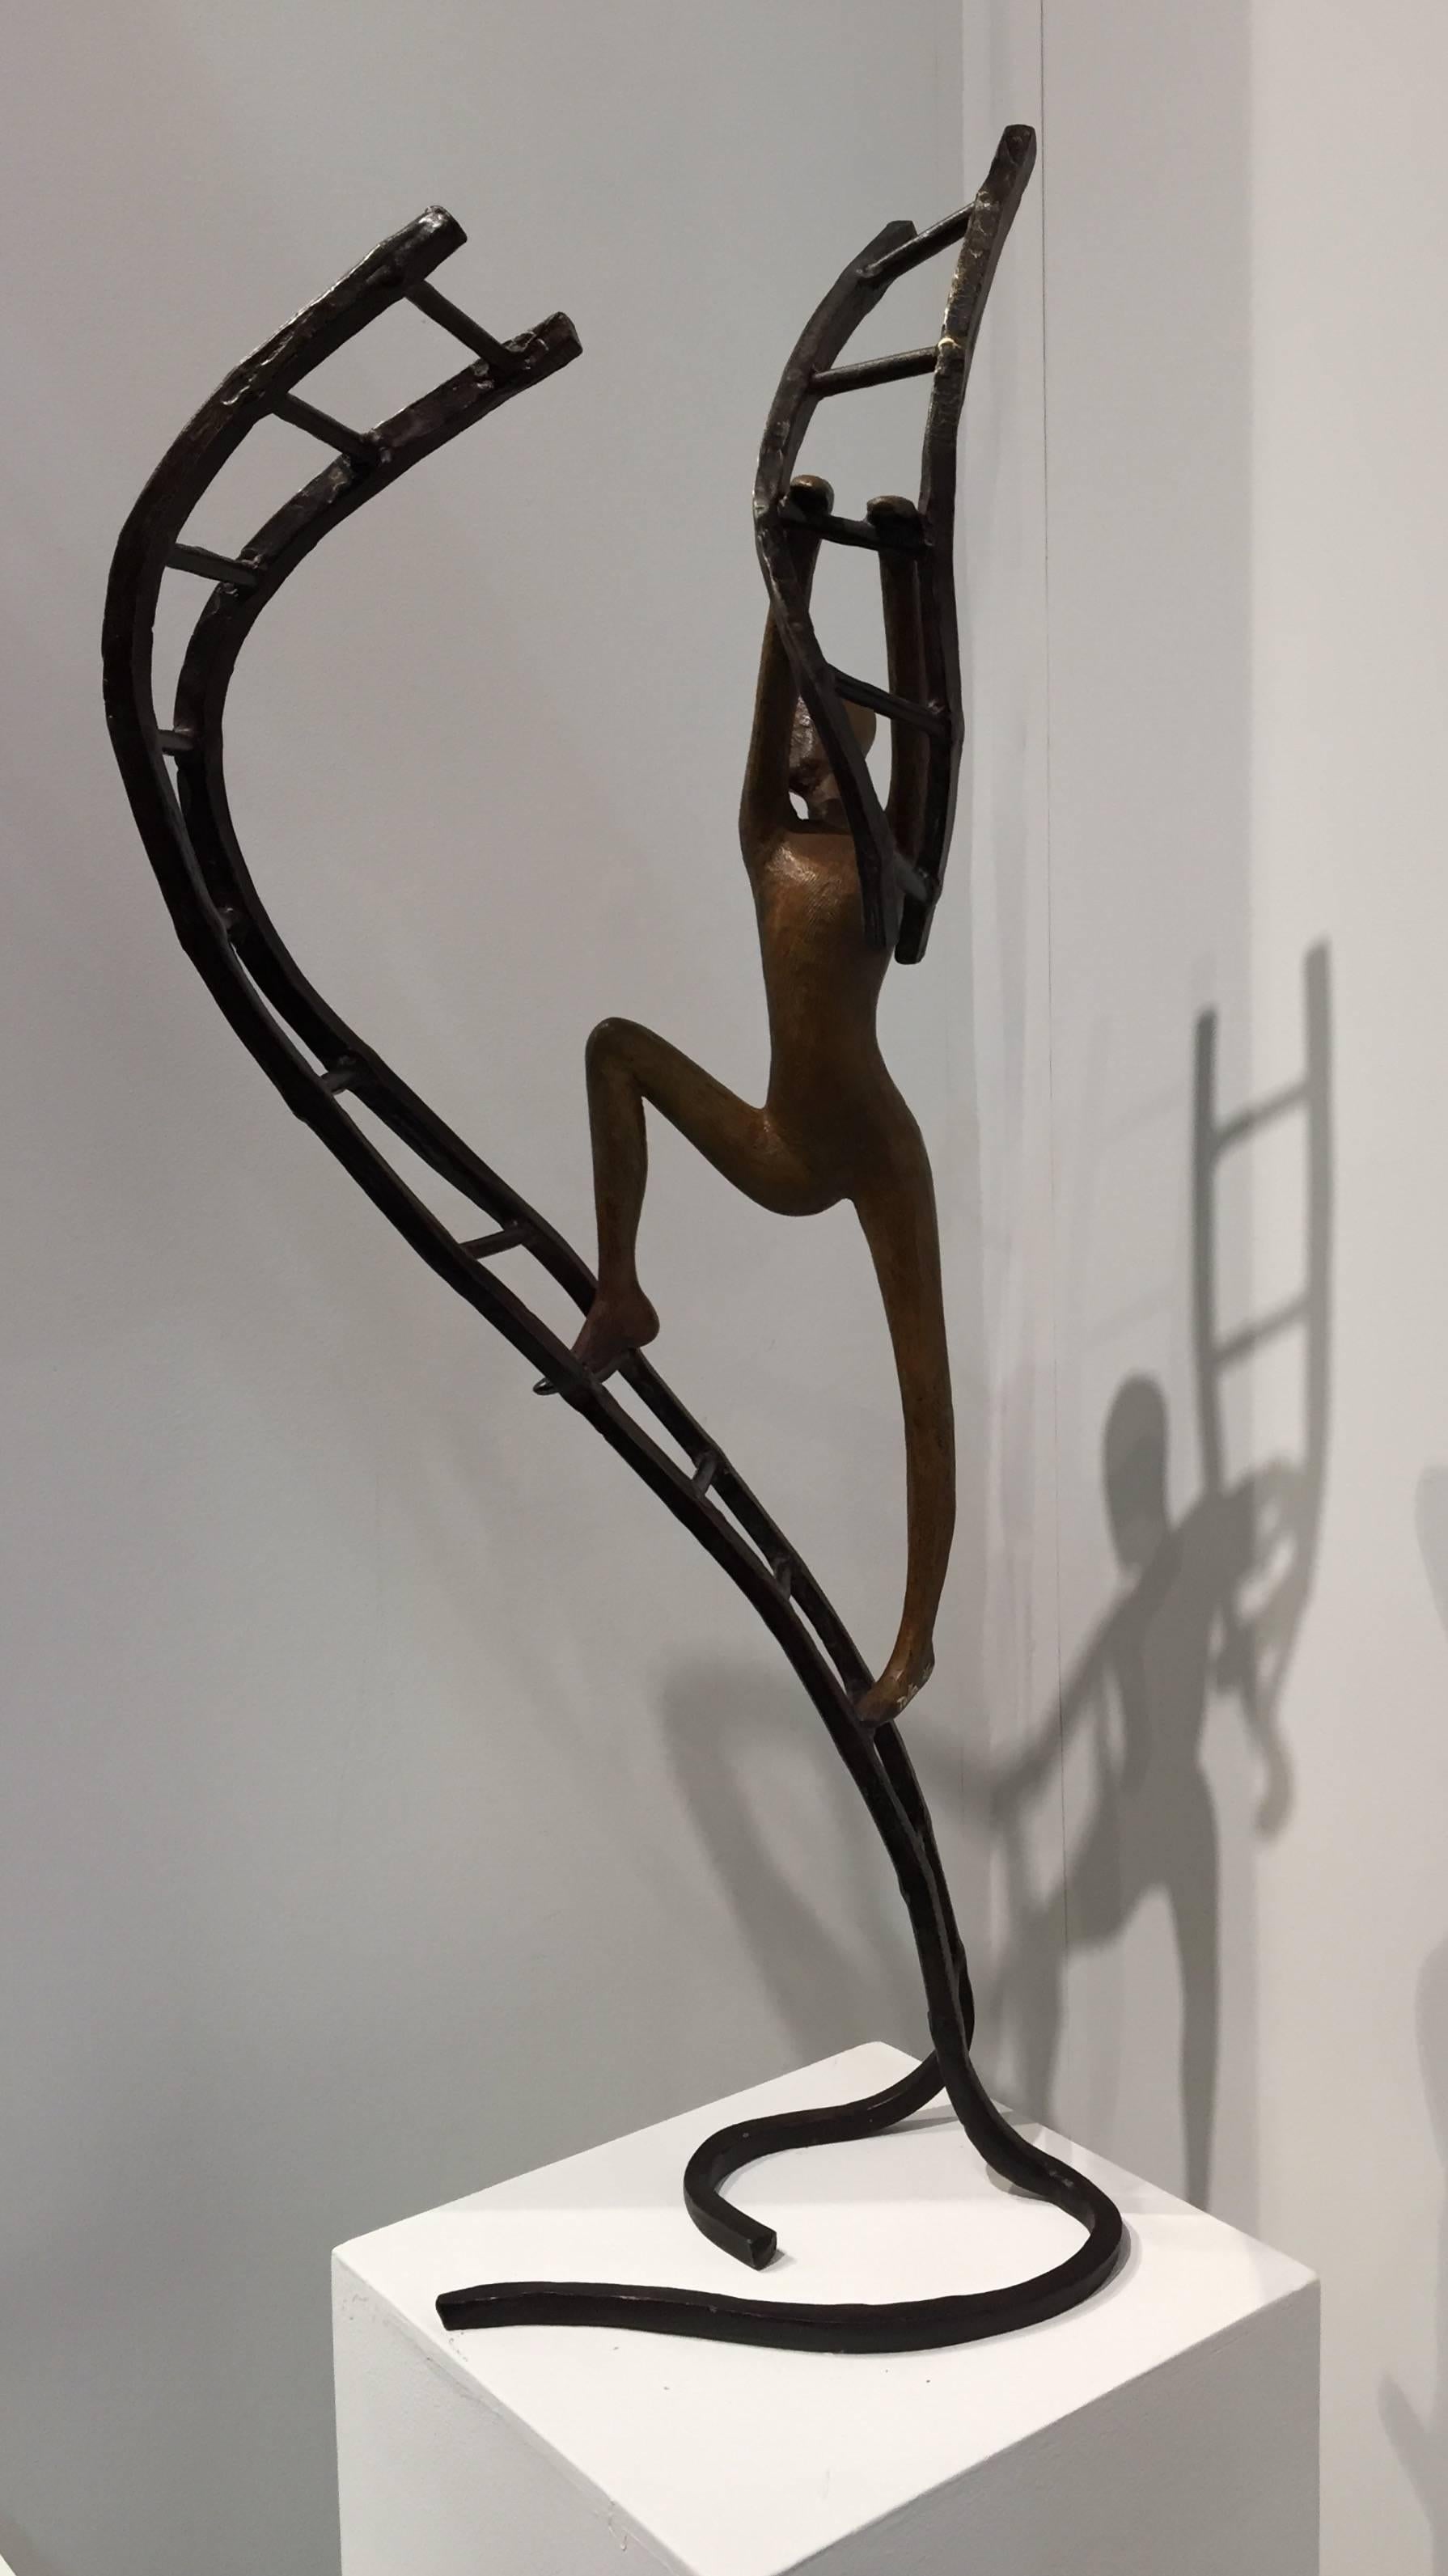 A single character sculpture from the artist's iconic ladder series, this new work combines the energy in movement with the pondering of another of life's questions. The character is in a strong stance but elegantly gliding upward.